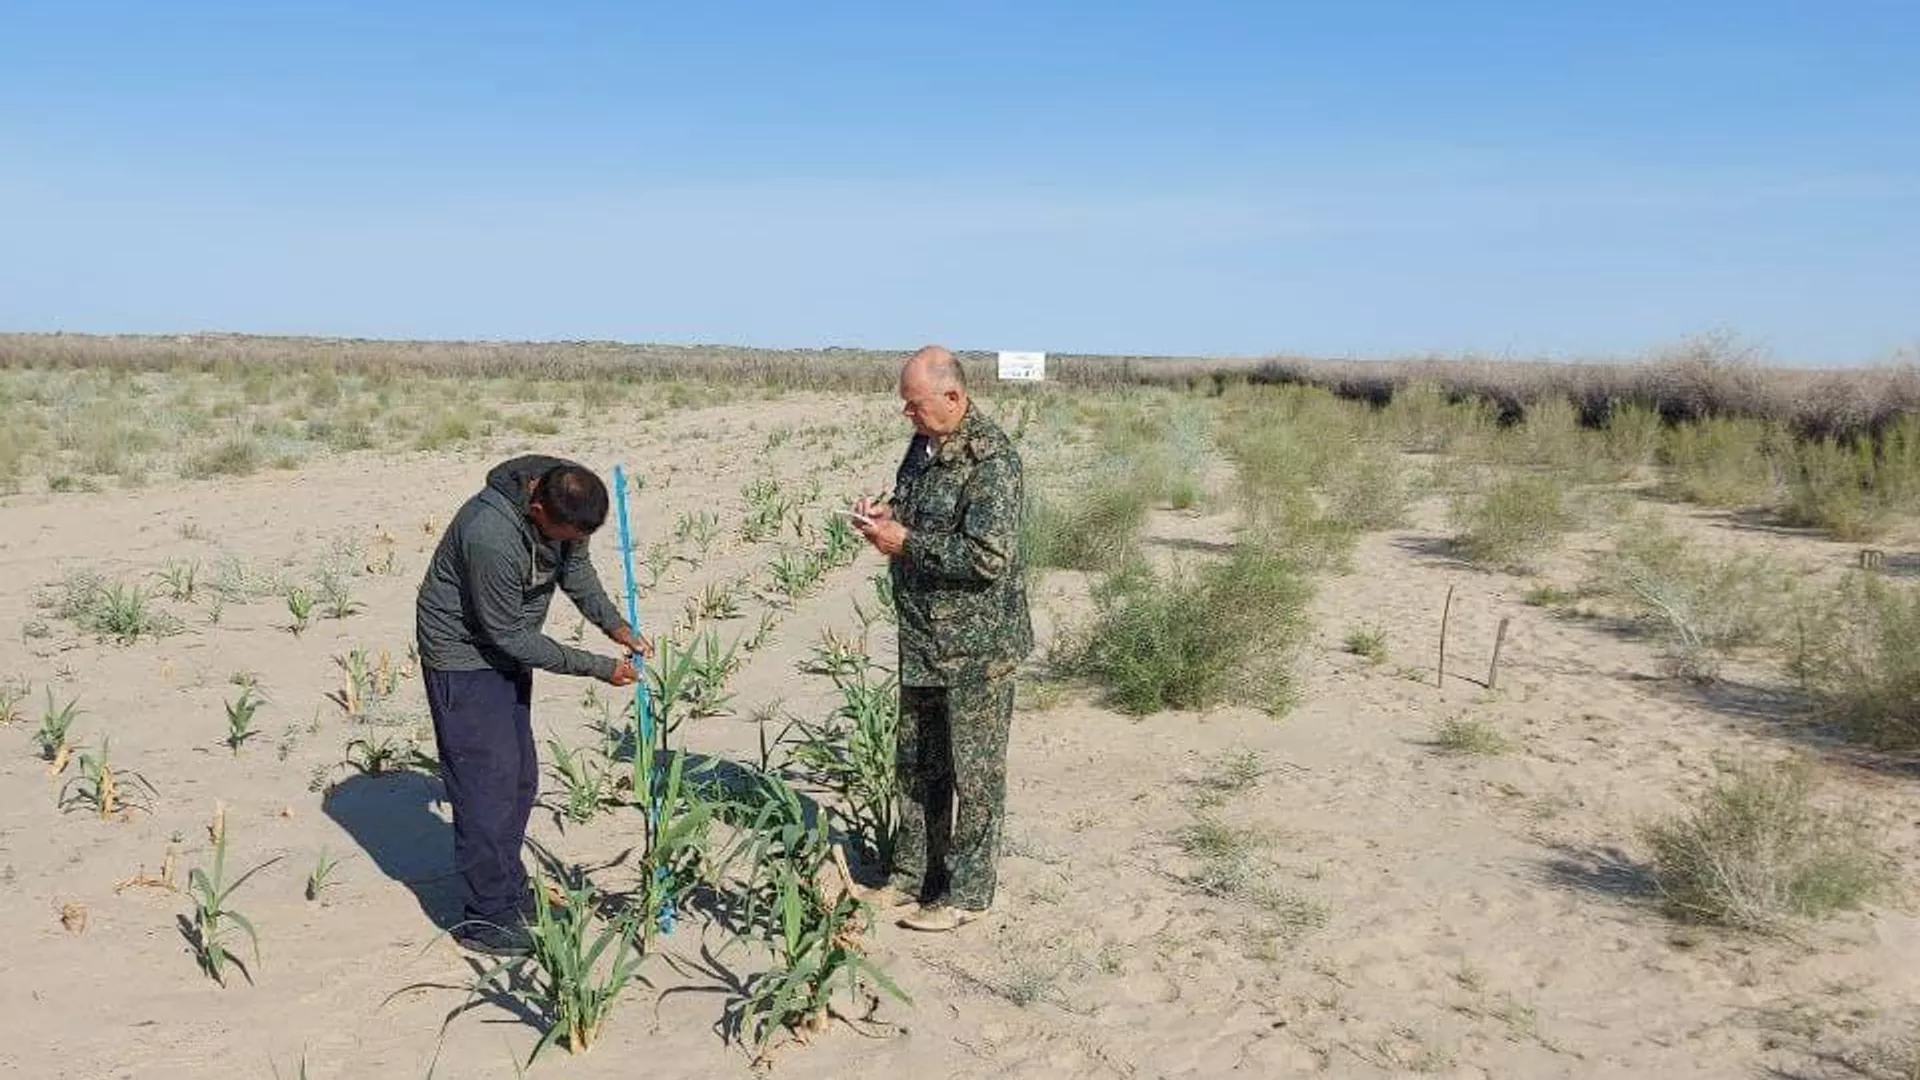 A new species of plant is being planted at the bottom of the Aral Sea